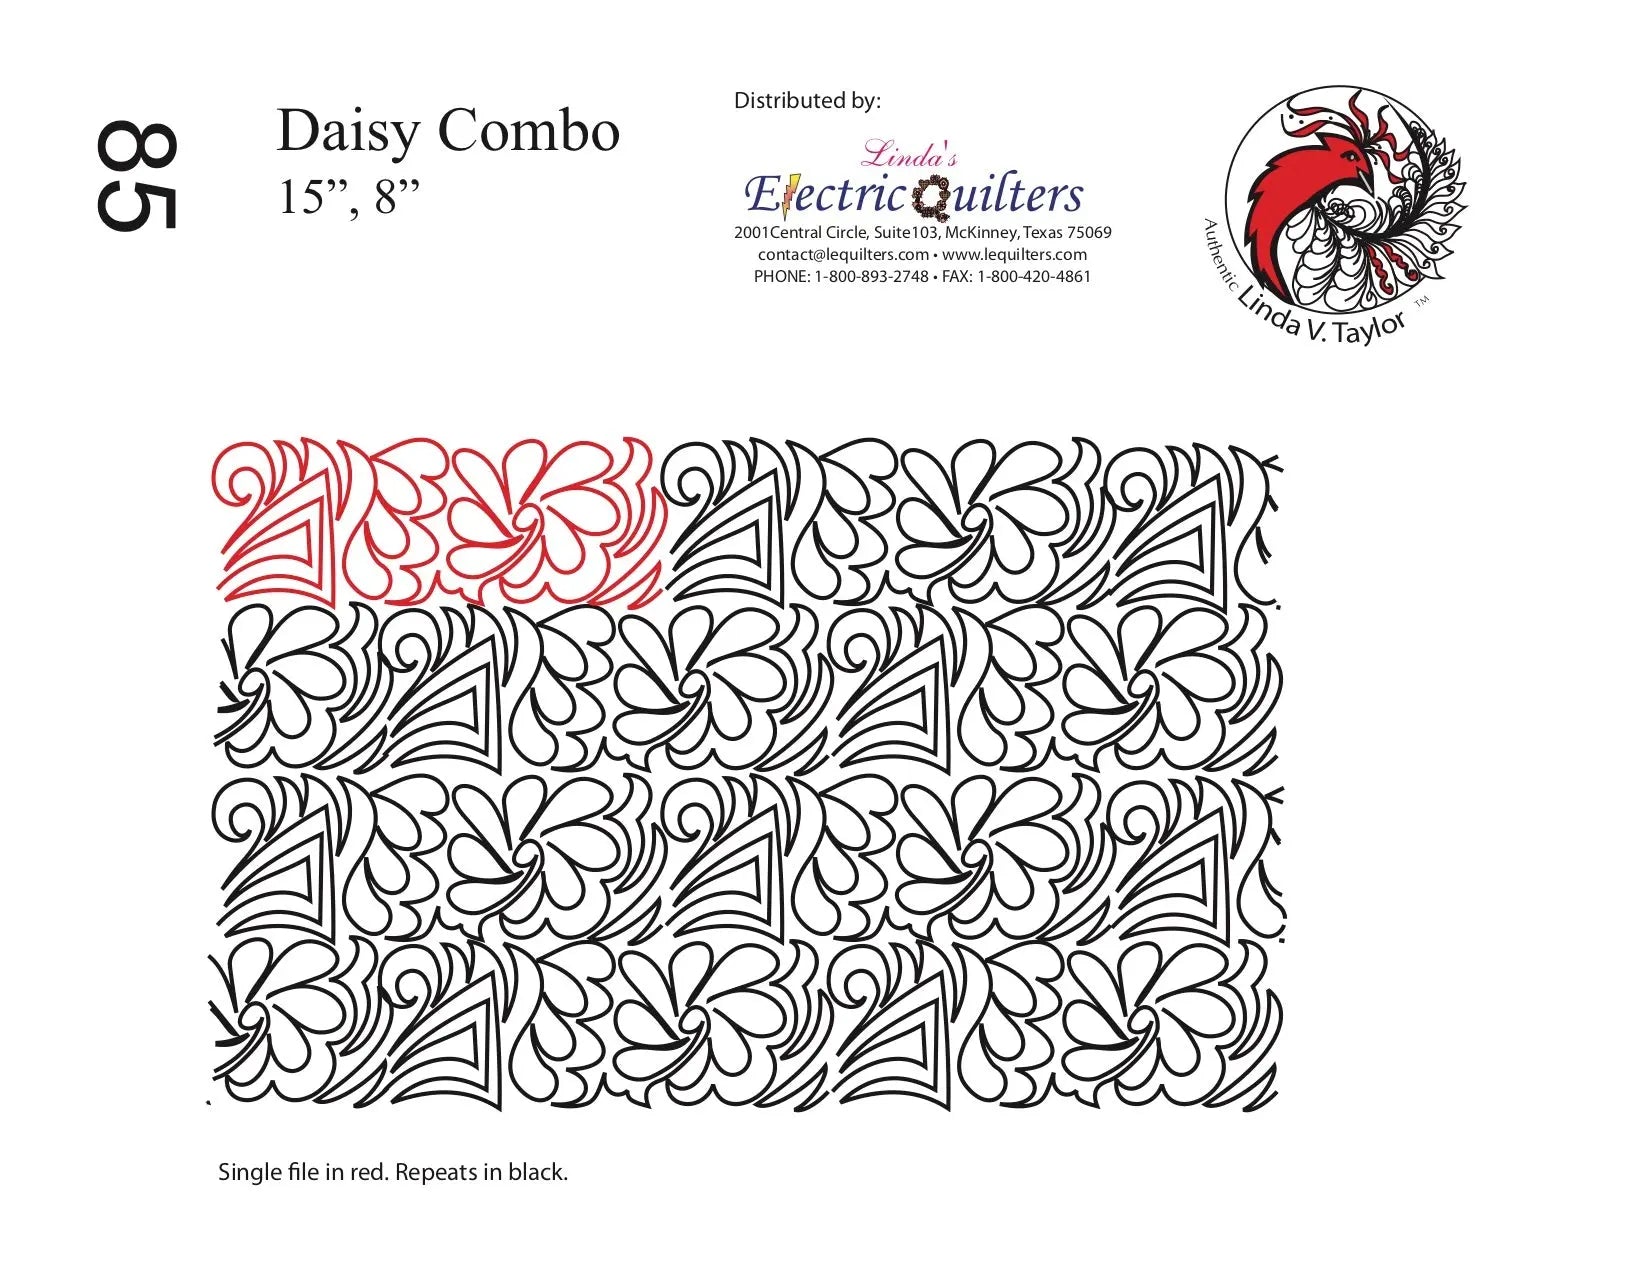 085 Daisy Combo Pantograph by Linda V. Taylor - Linda's Electric Quilters